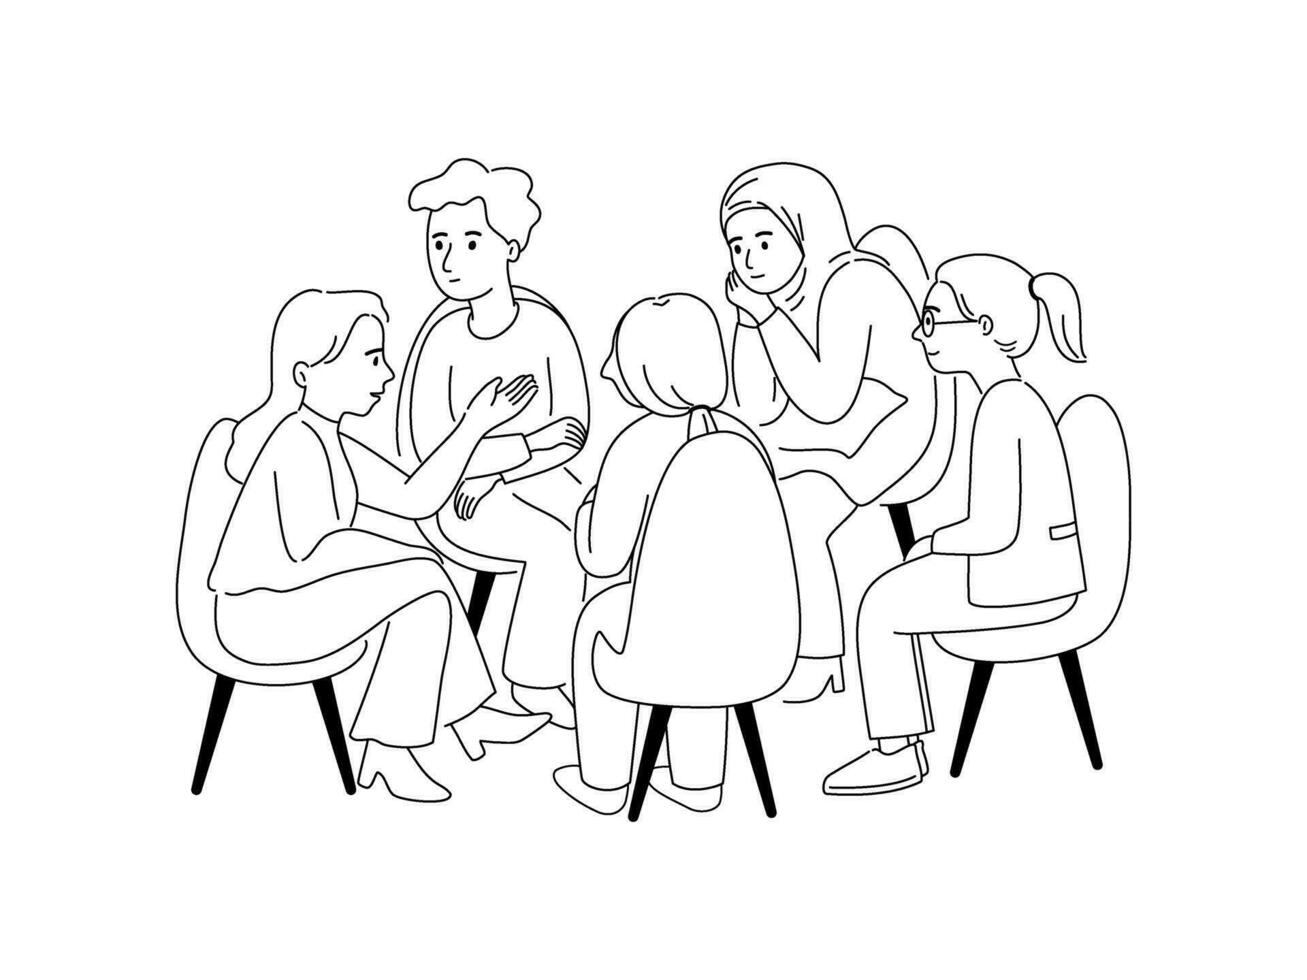 People in group therapy session, talk therapy and group therapy concept. hand drawn outline illustrations. vector